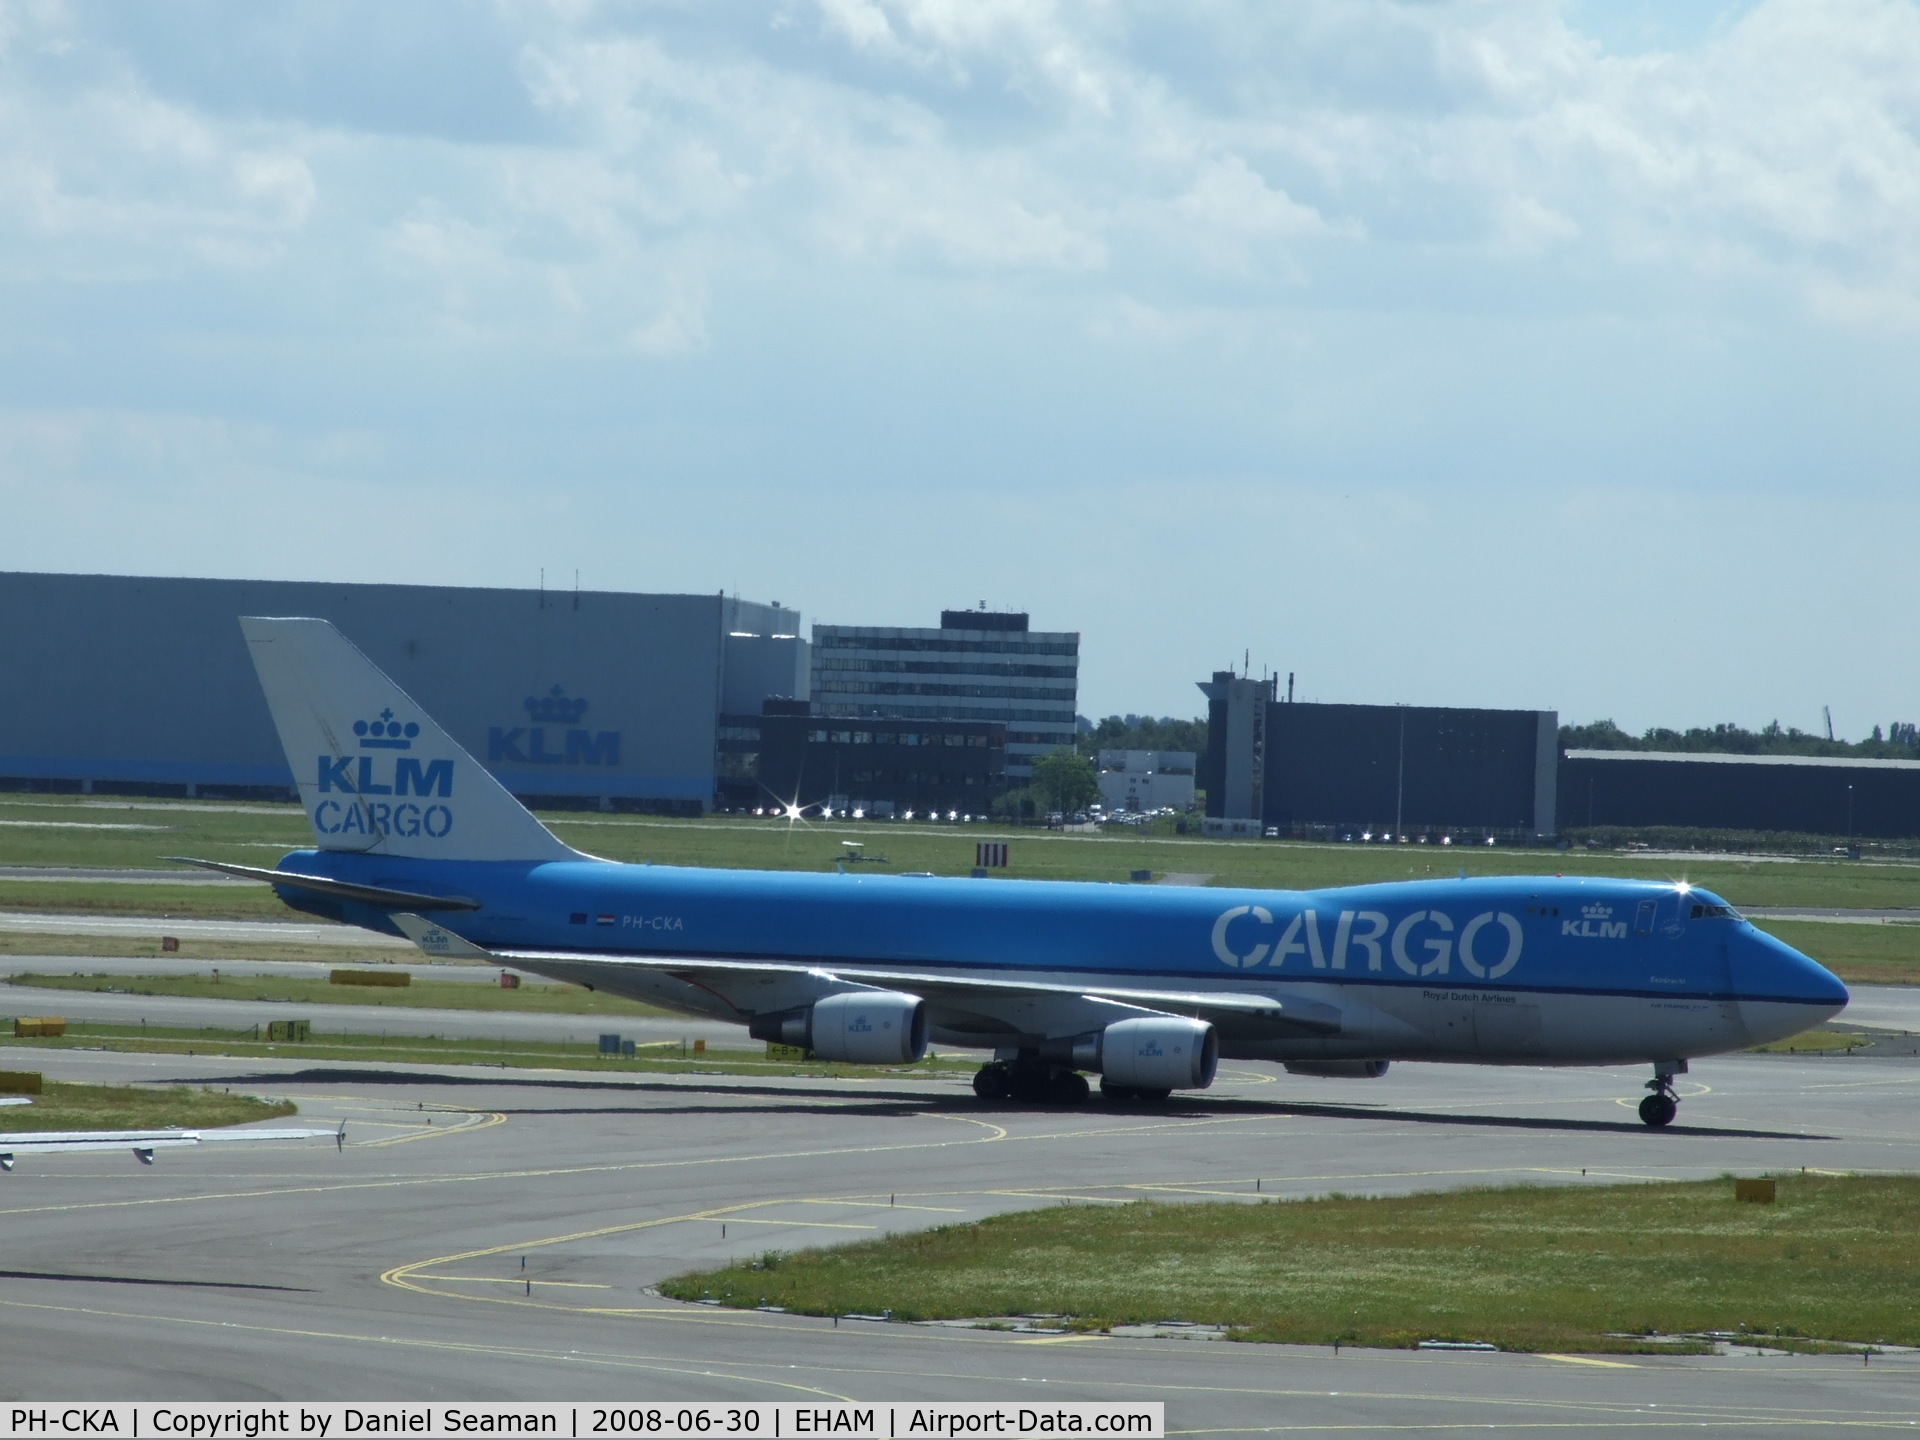 PH-CKA, 2003 Boeing 747-406F/ER/SCD C/N 33694, one of meny cargo today.